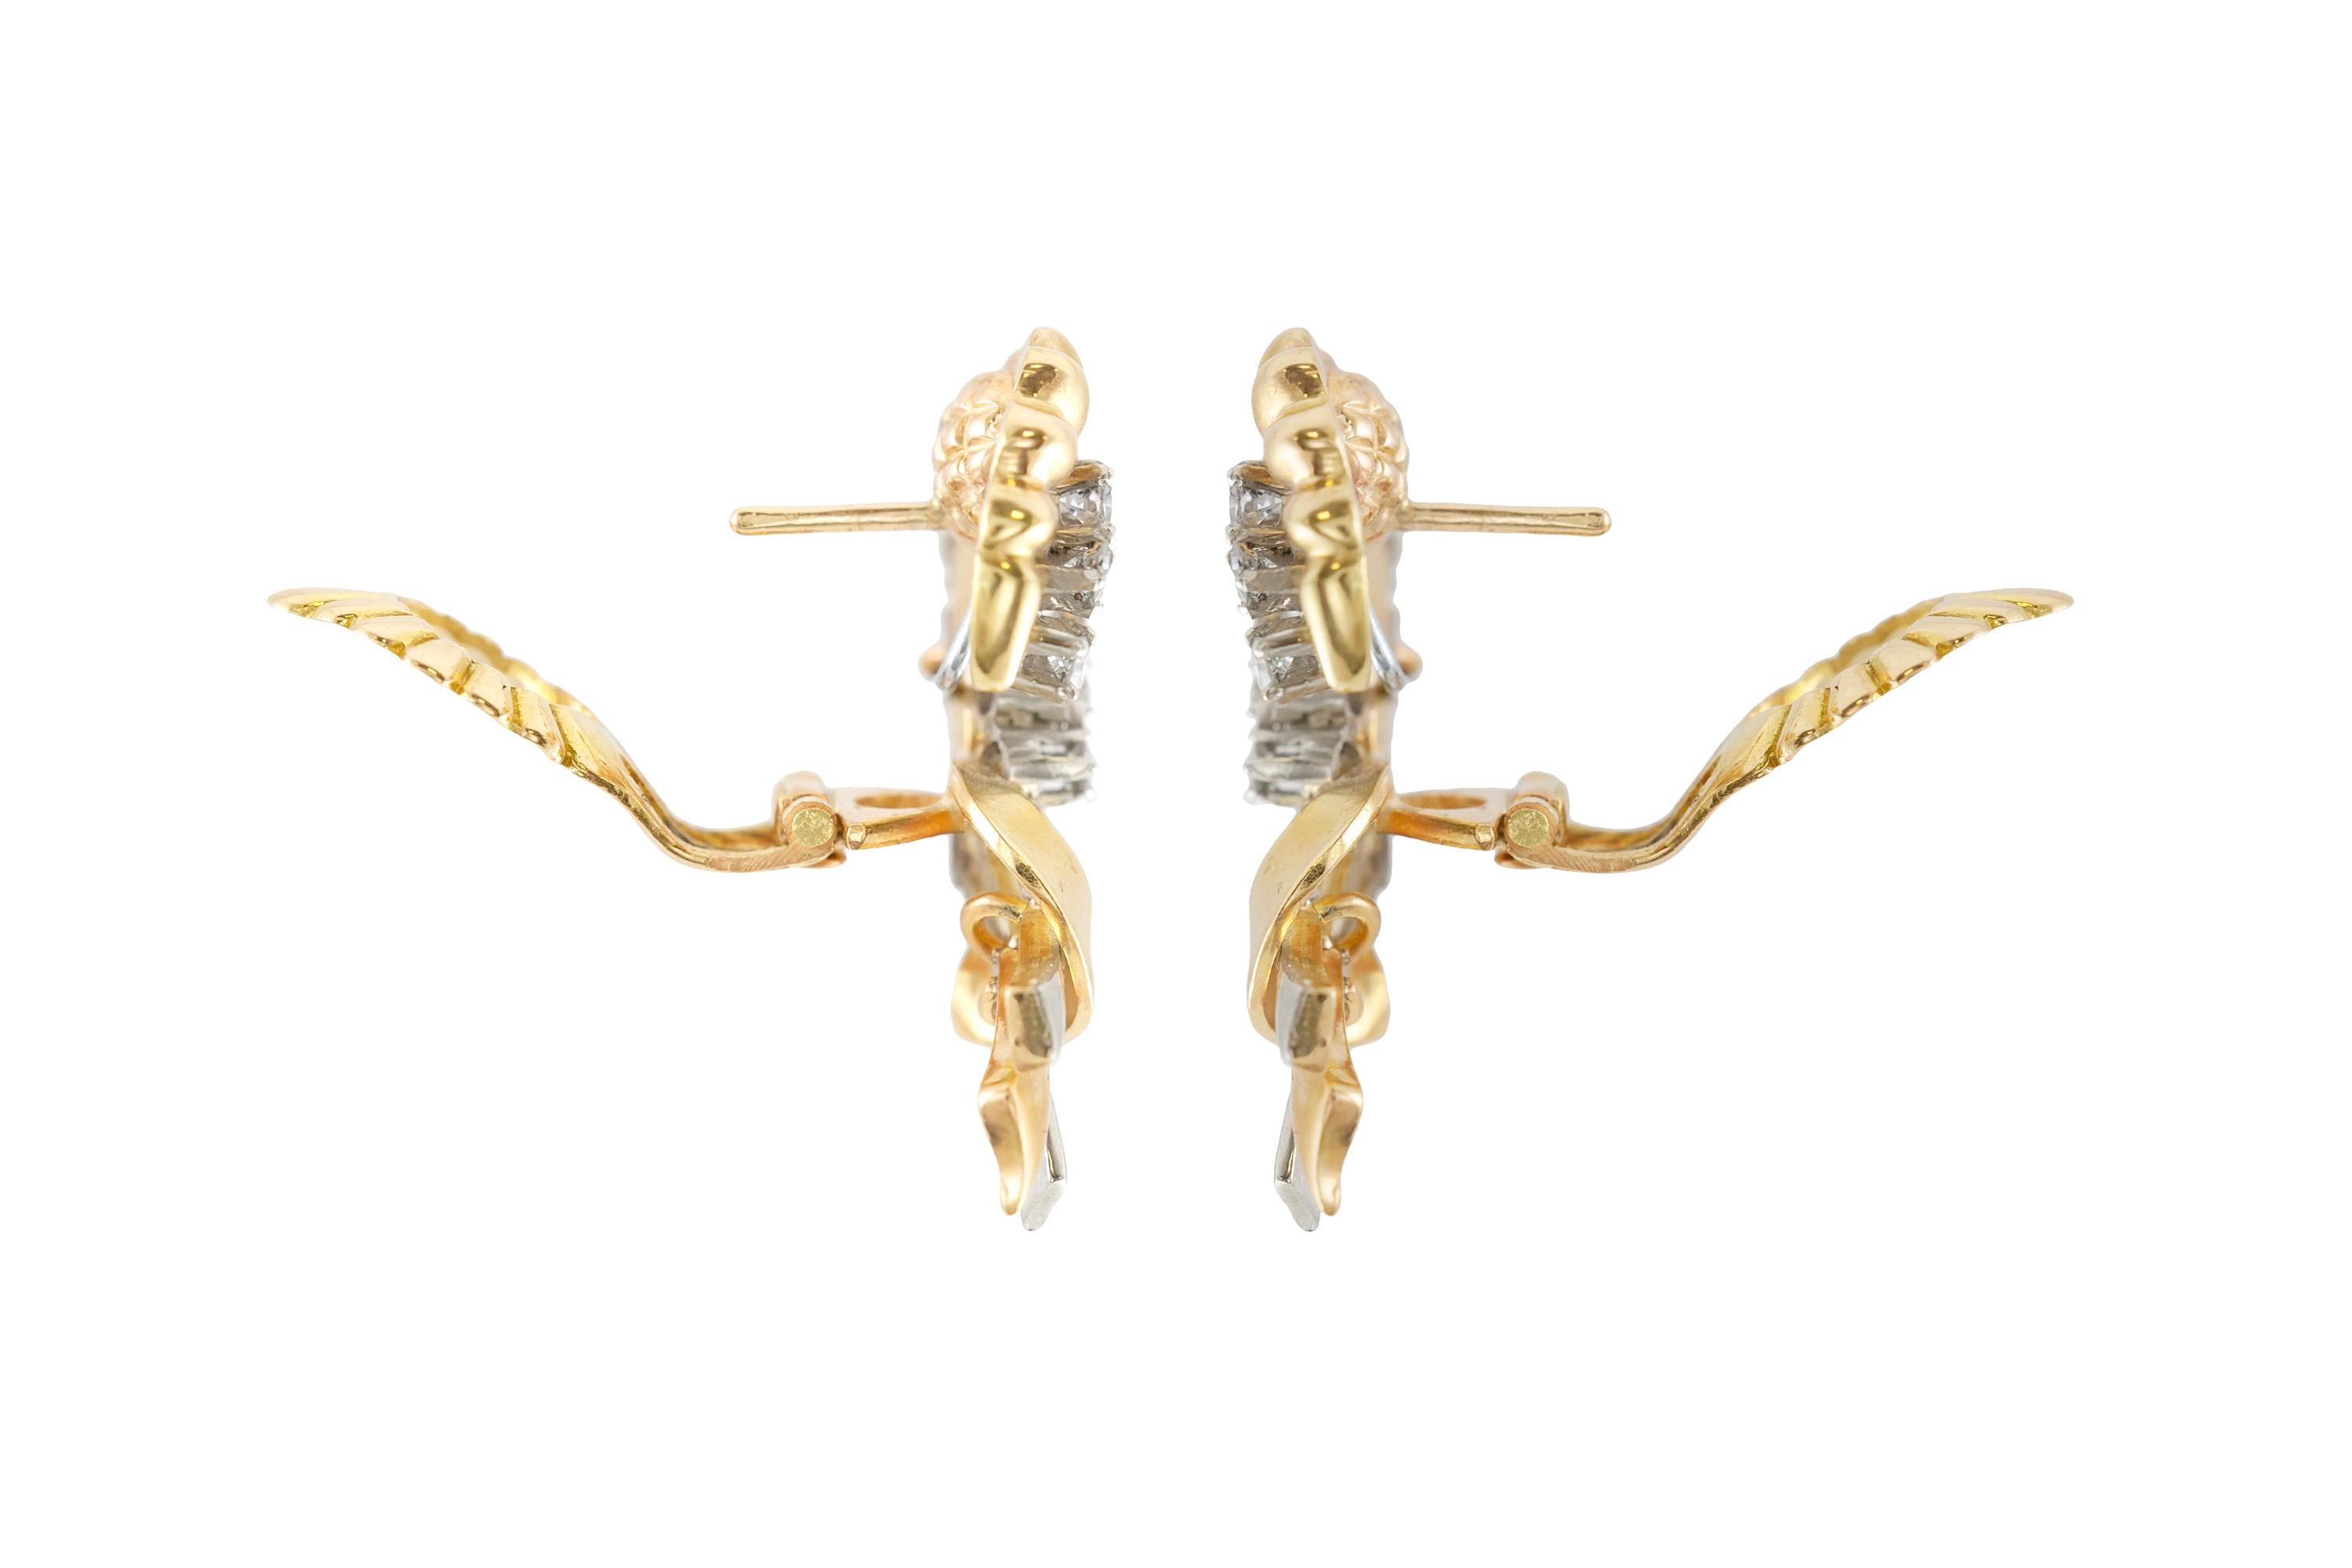 The earrings are finely crafted in 18k yellow gold and platinum with round cut diamonds weighing a total of approximately 1.50 carat. 
Circa 1940.